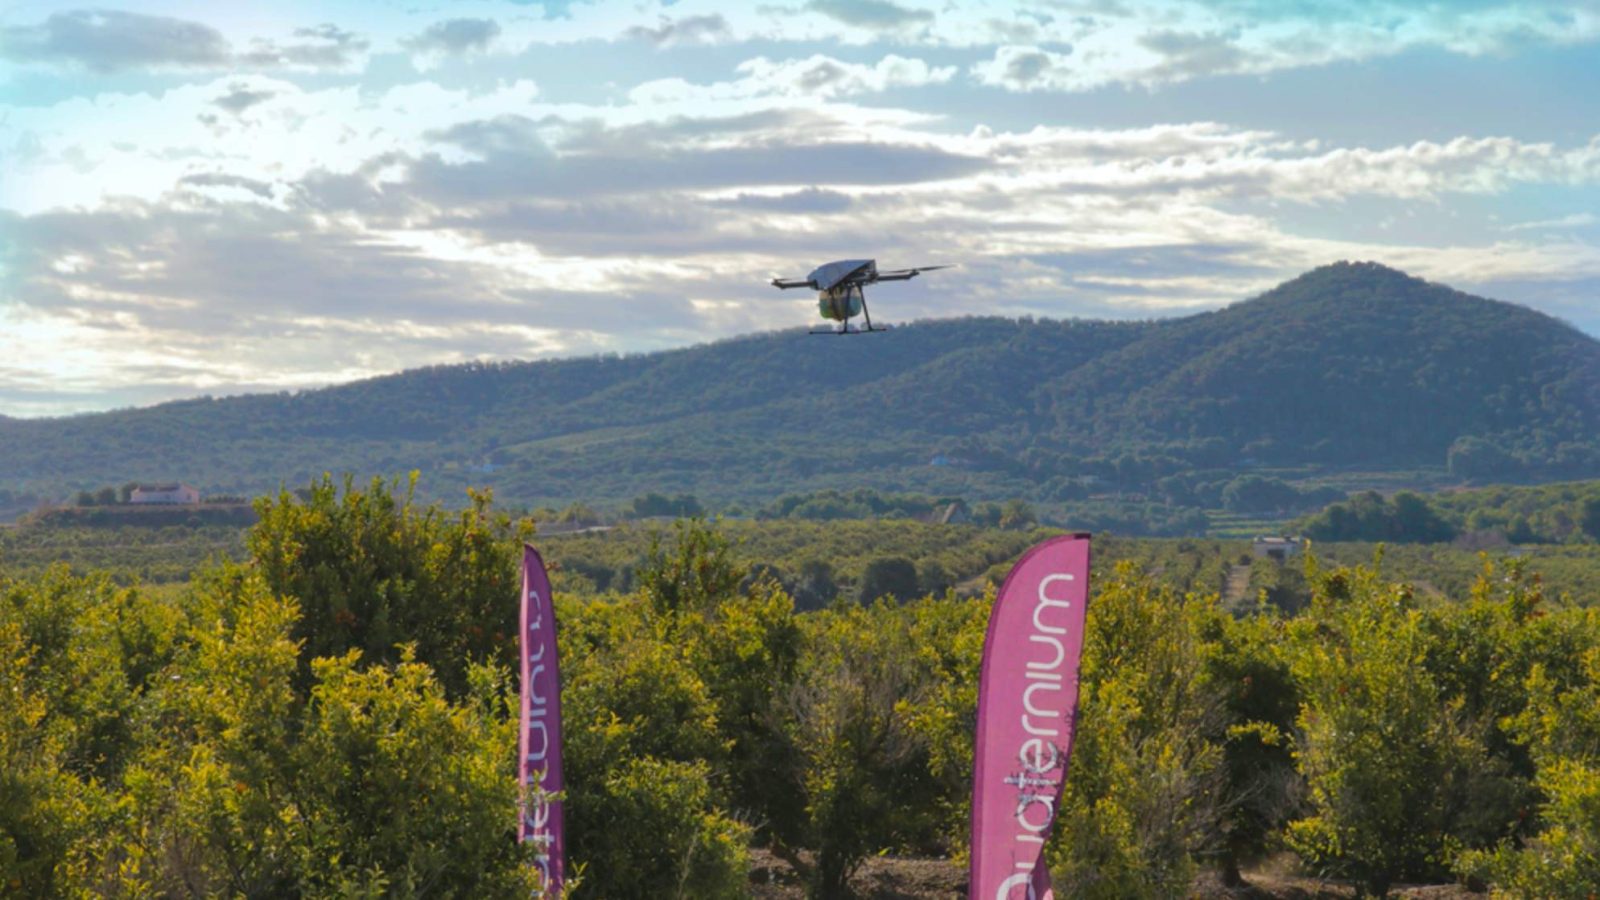 Spanish Quaternium sets drone flight time record of eight hours and ten minutes